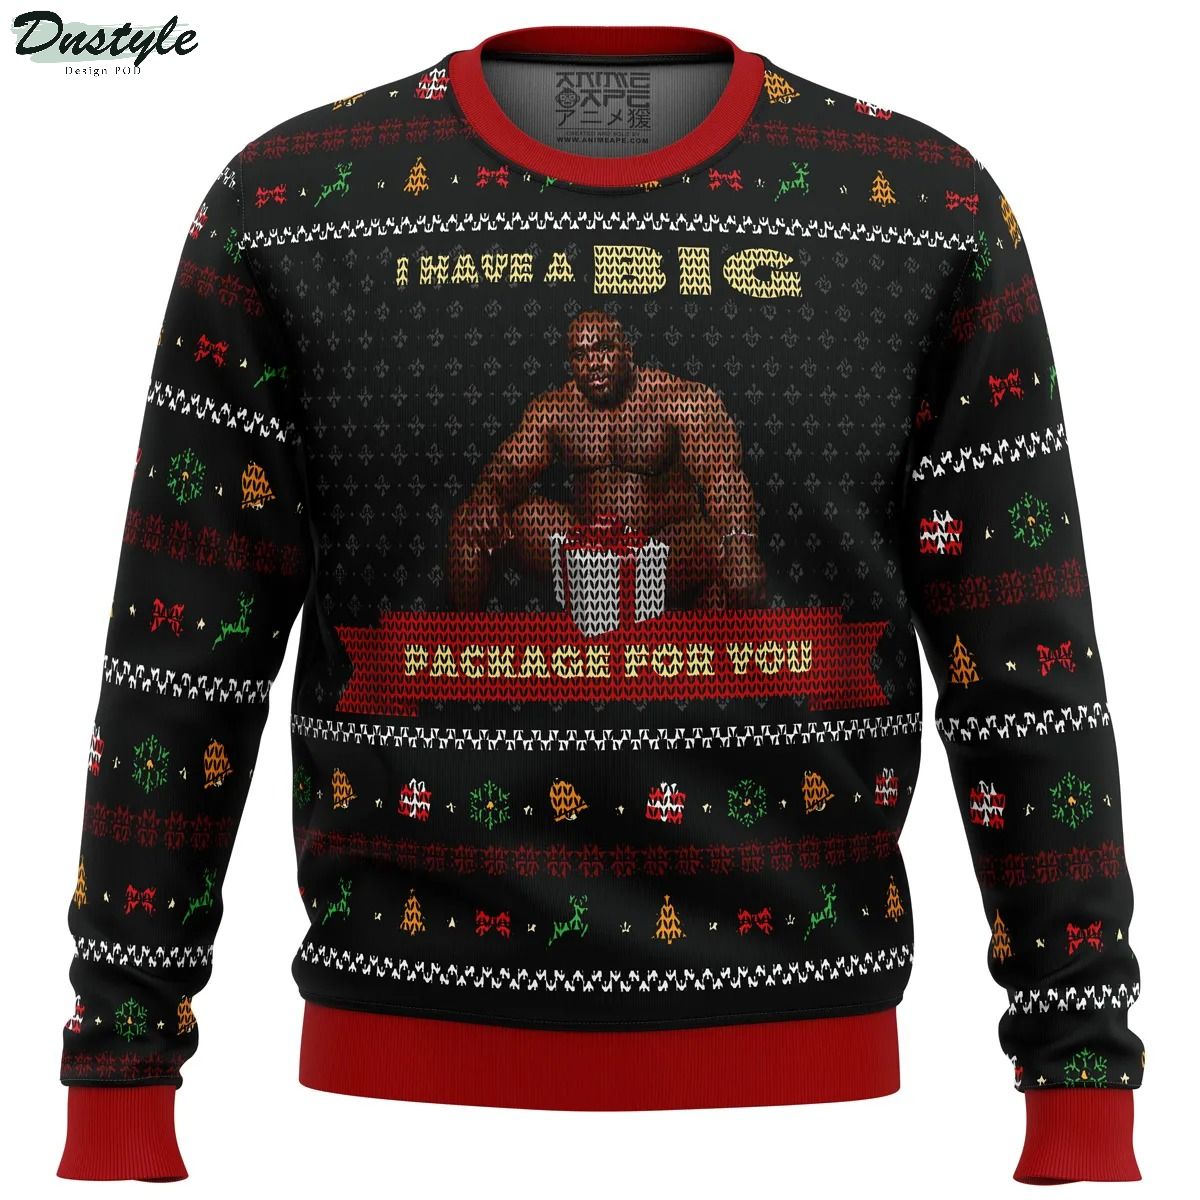 Barry Wood Meme I Have A Big Package For You Ugly Christmas Sweater